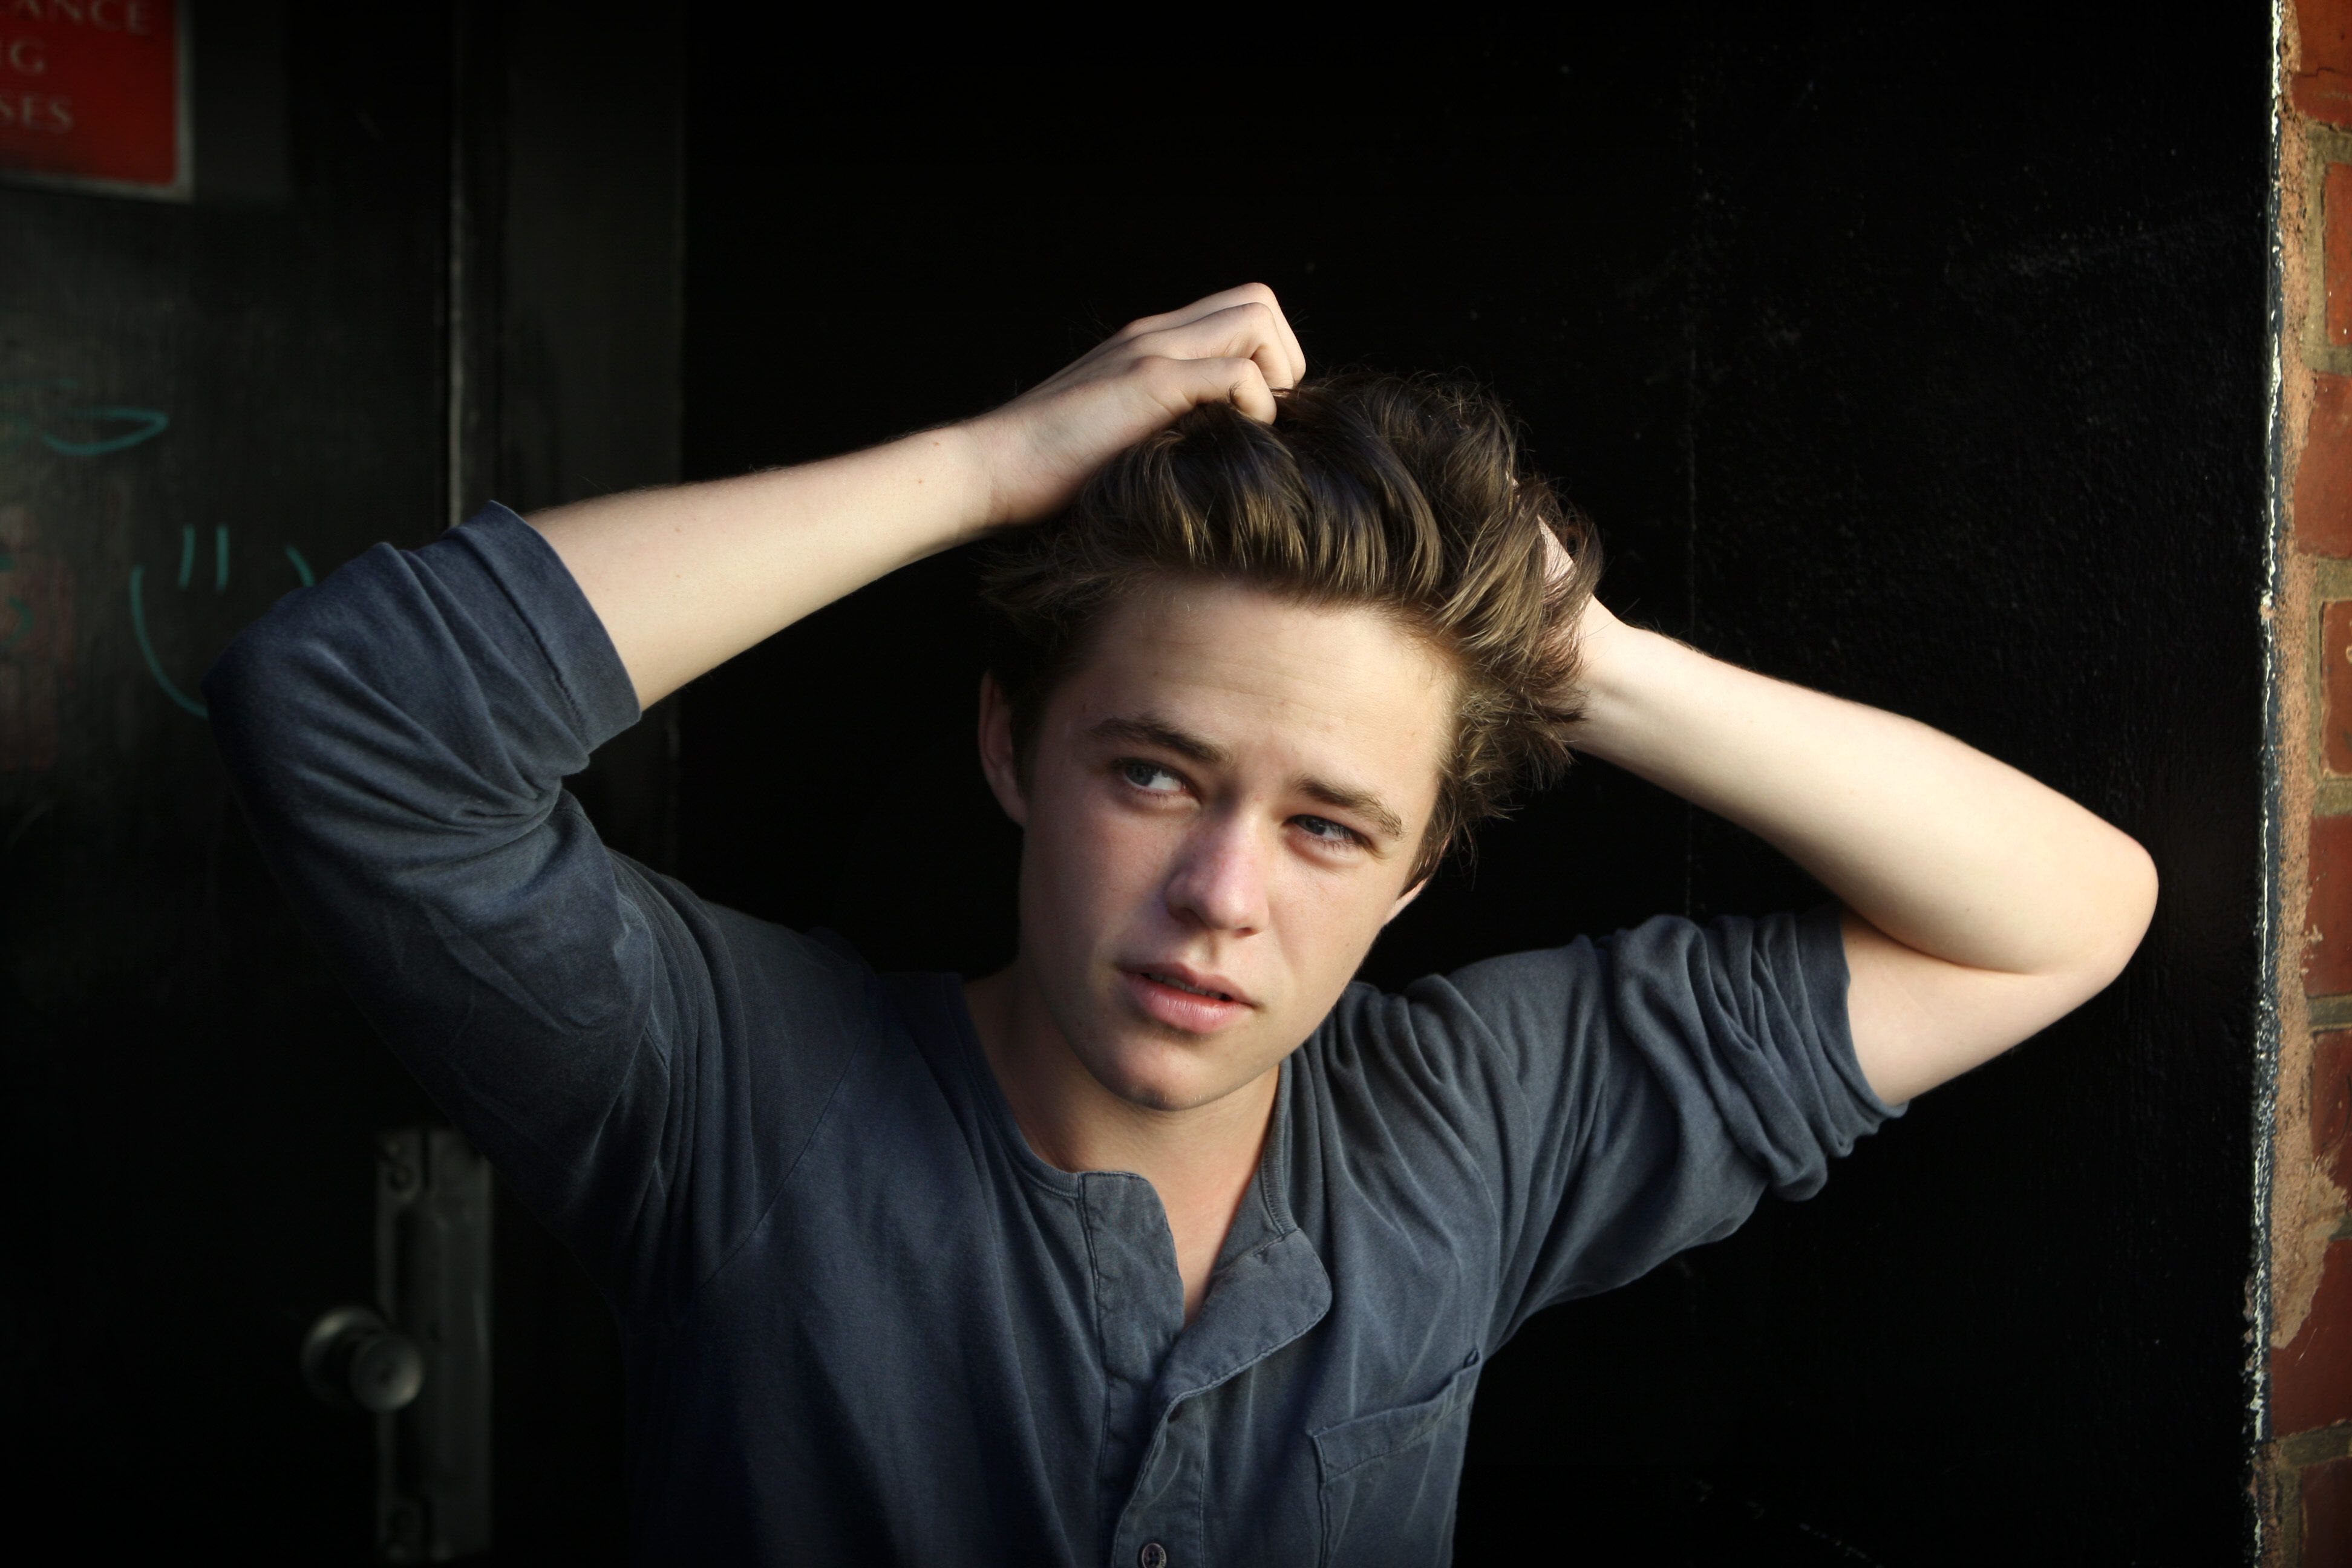 Harrison Gilbertson has certainly perfected the brooding look. Can't ...